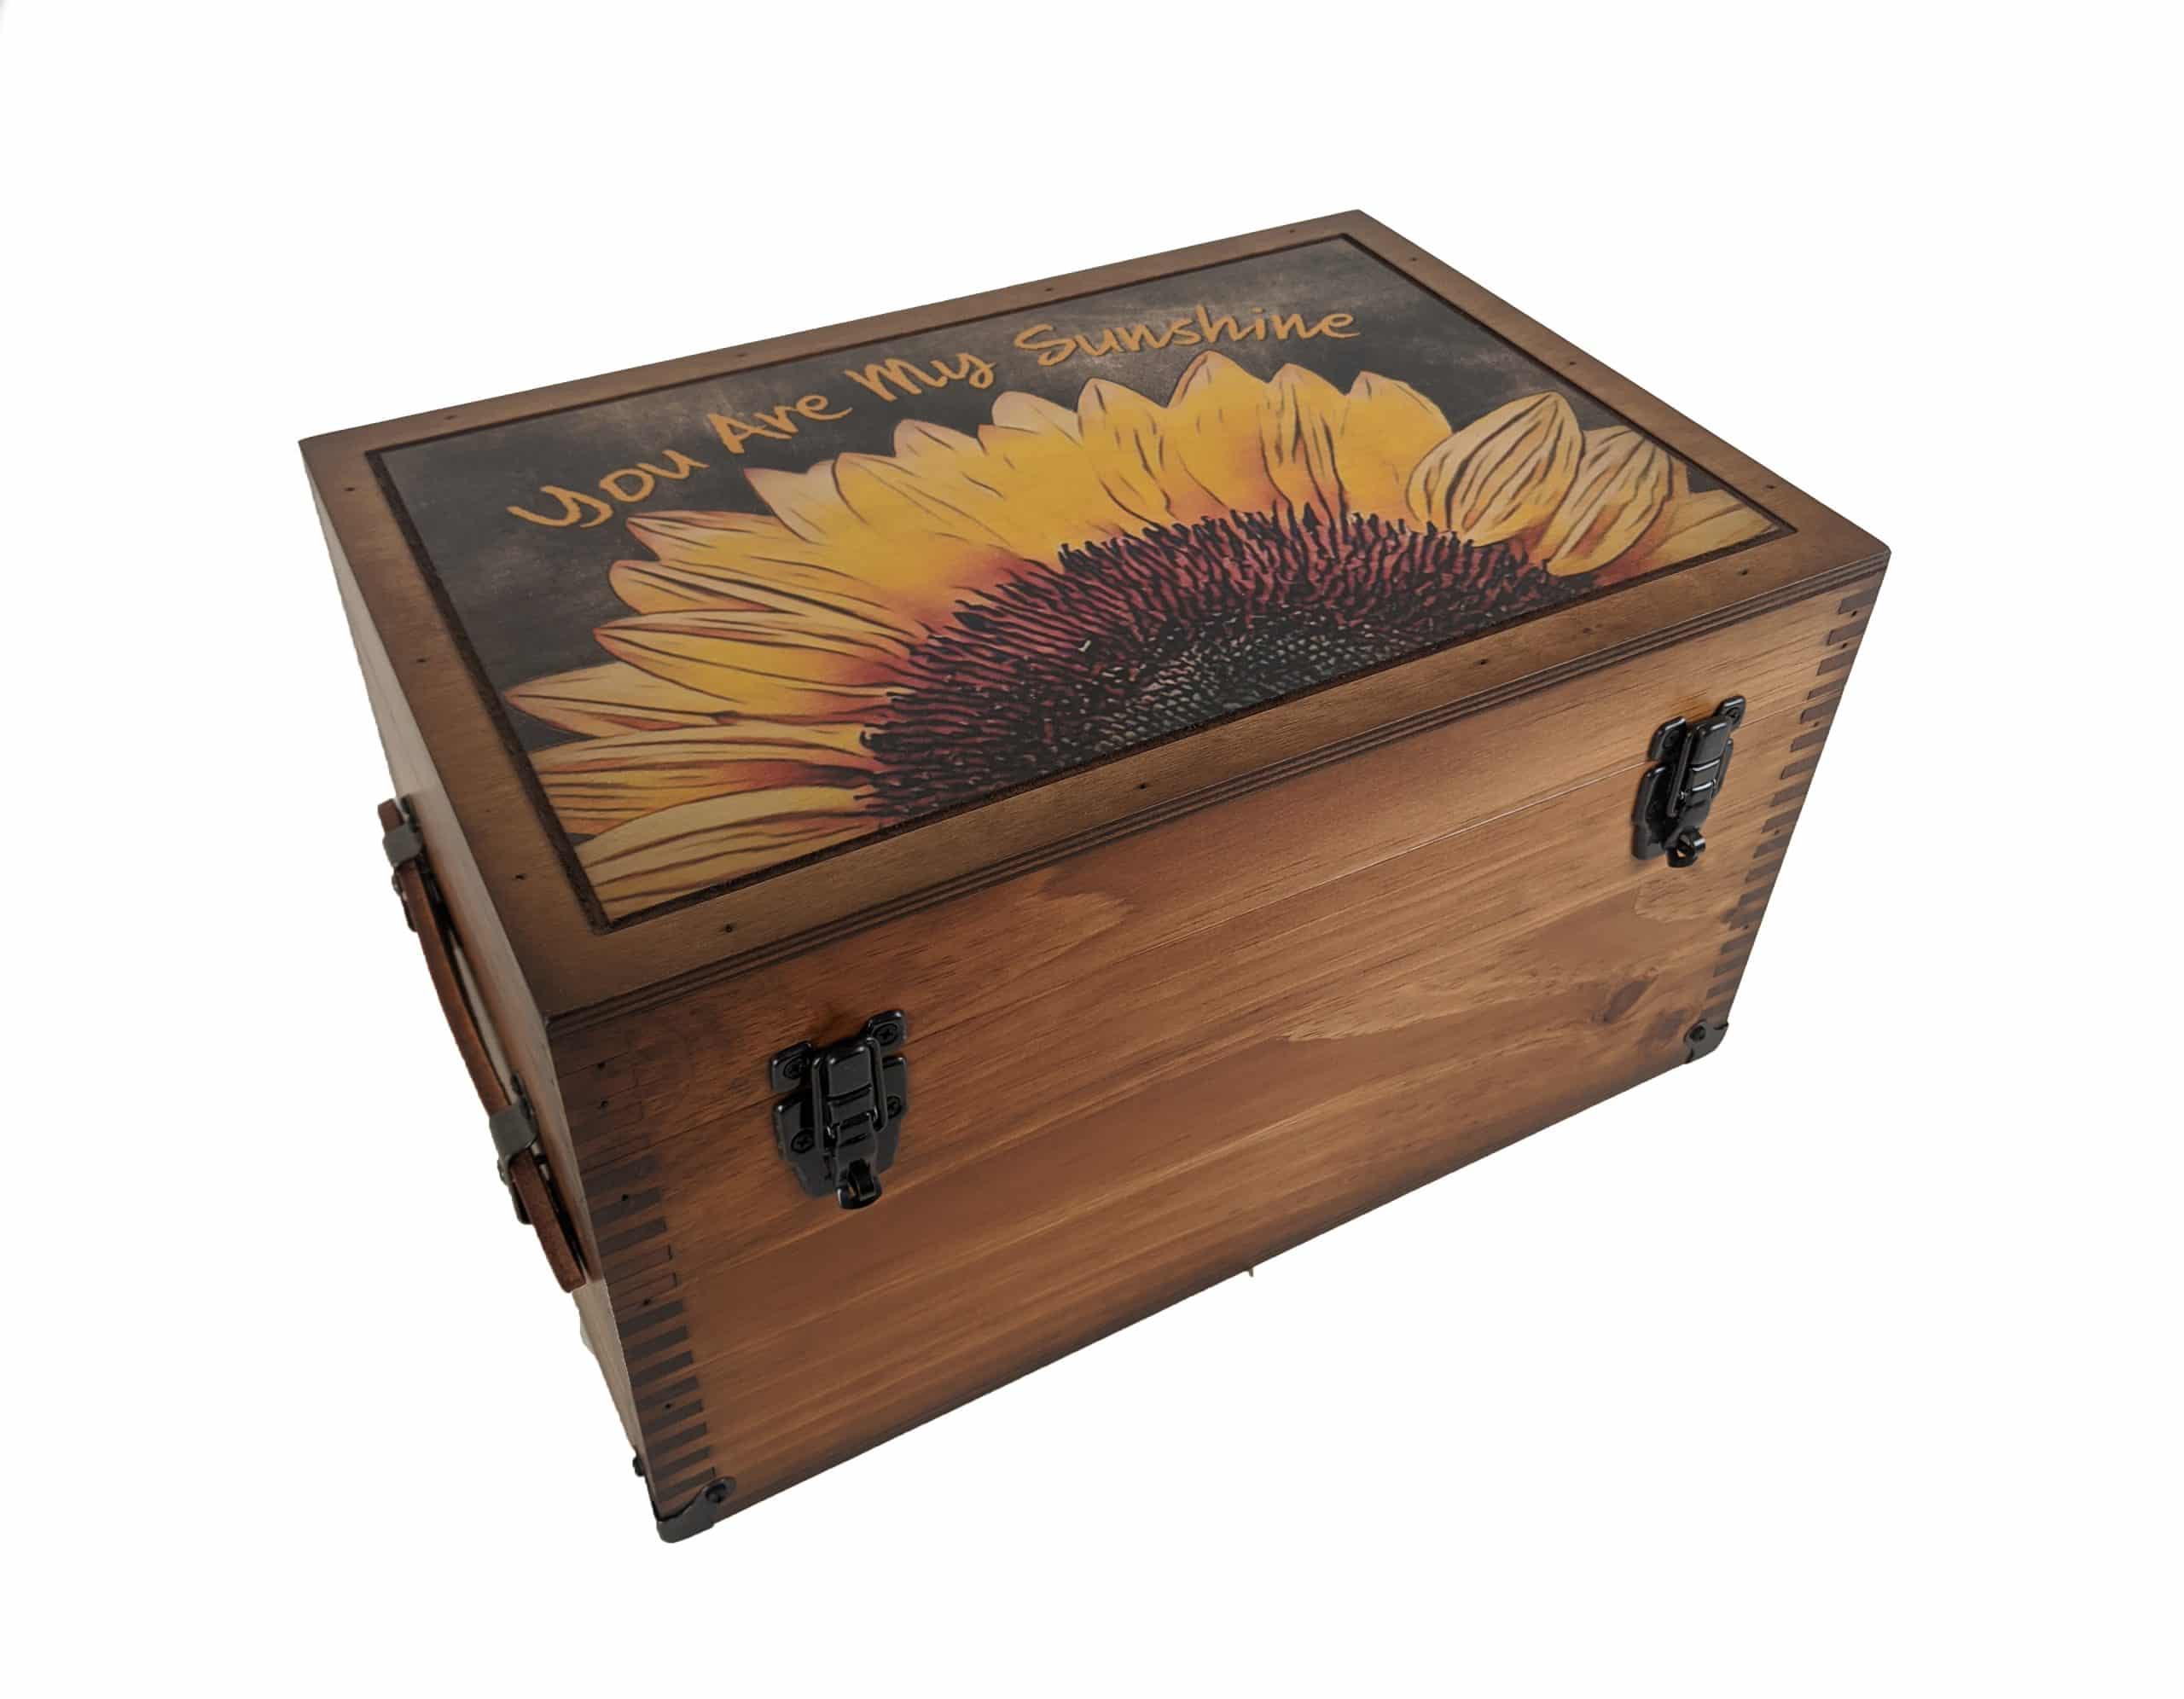 You are my sunshine book box – Words on Wood